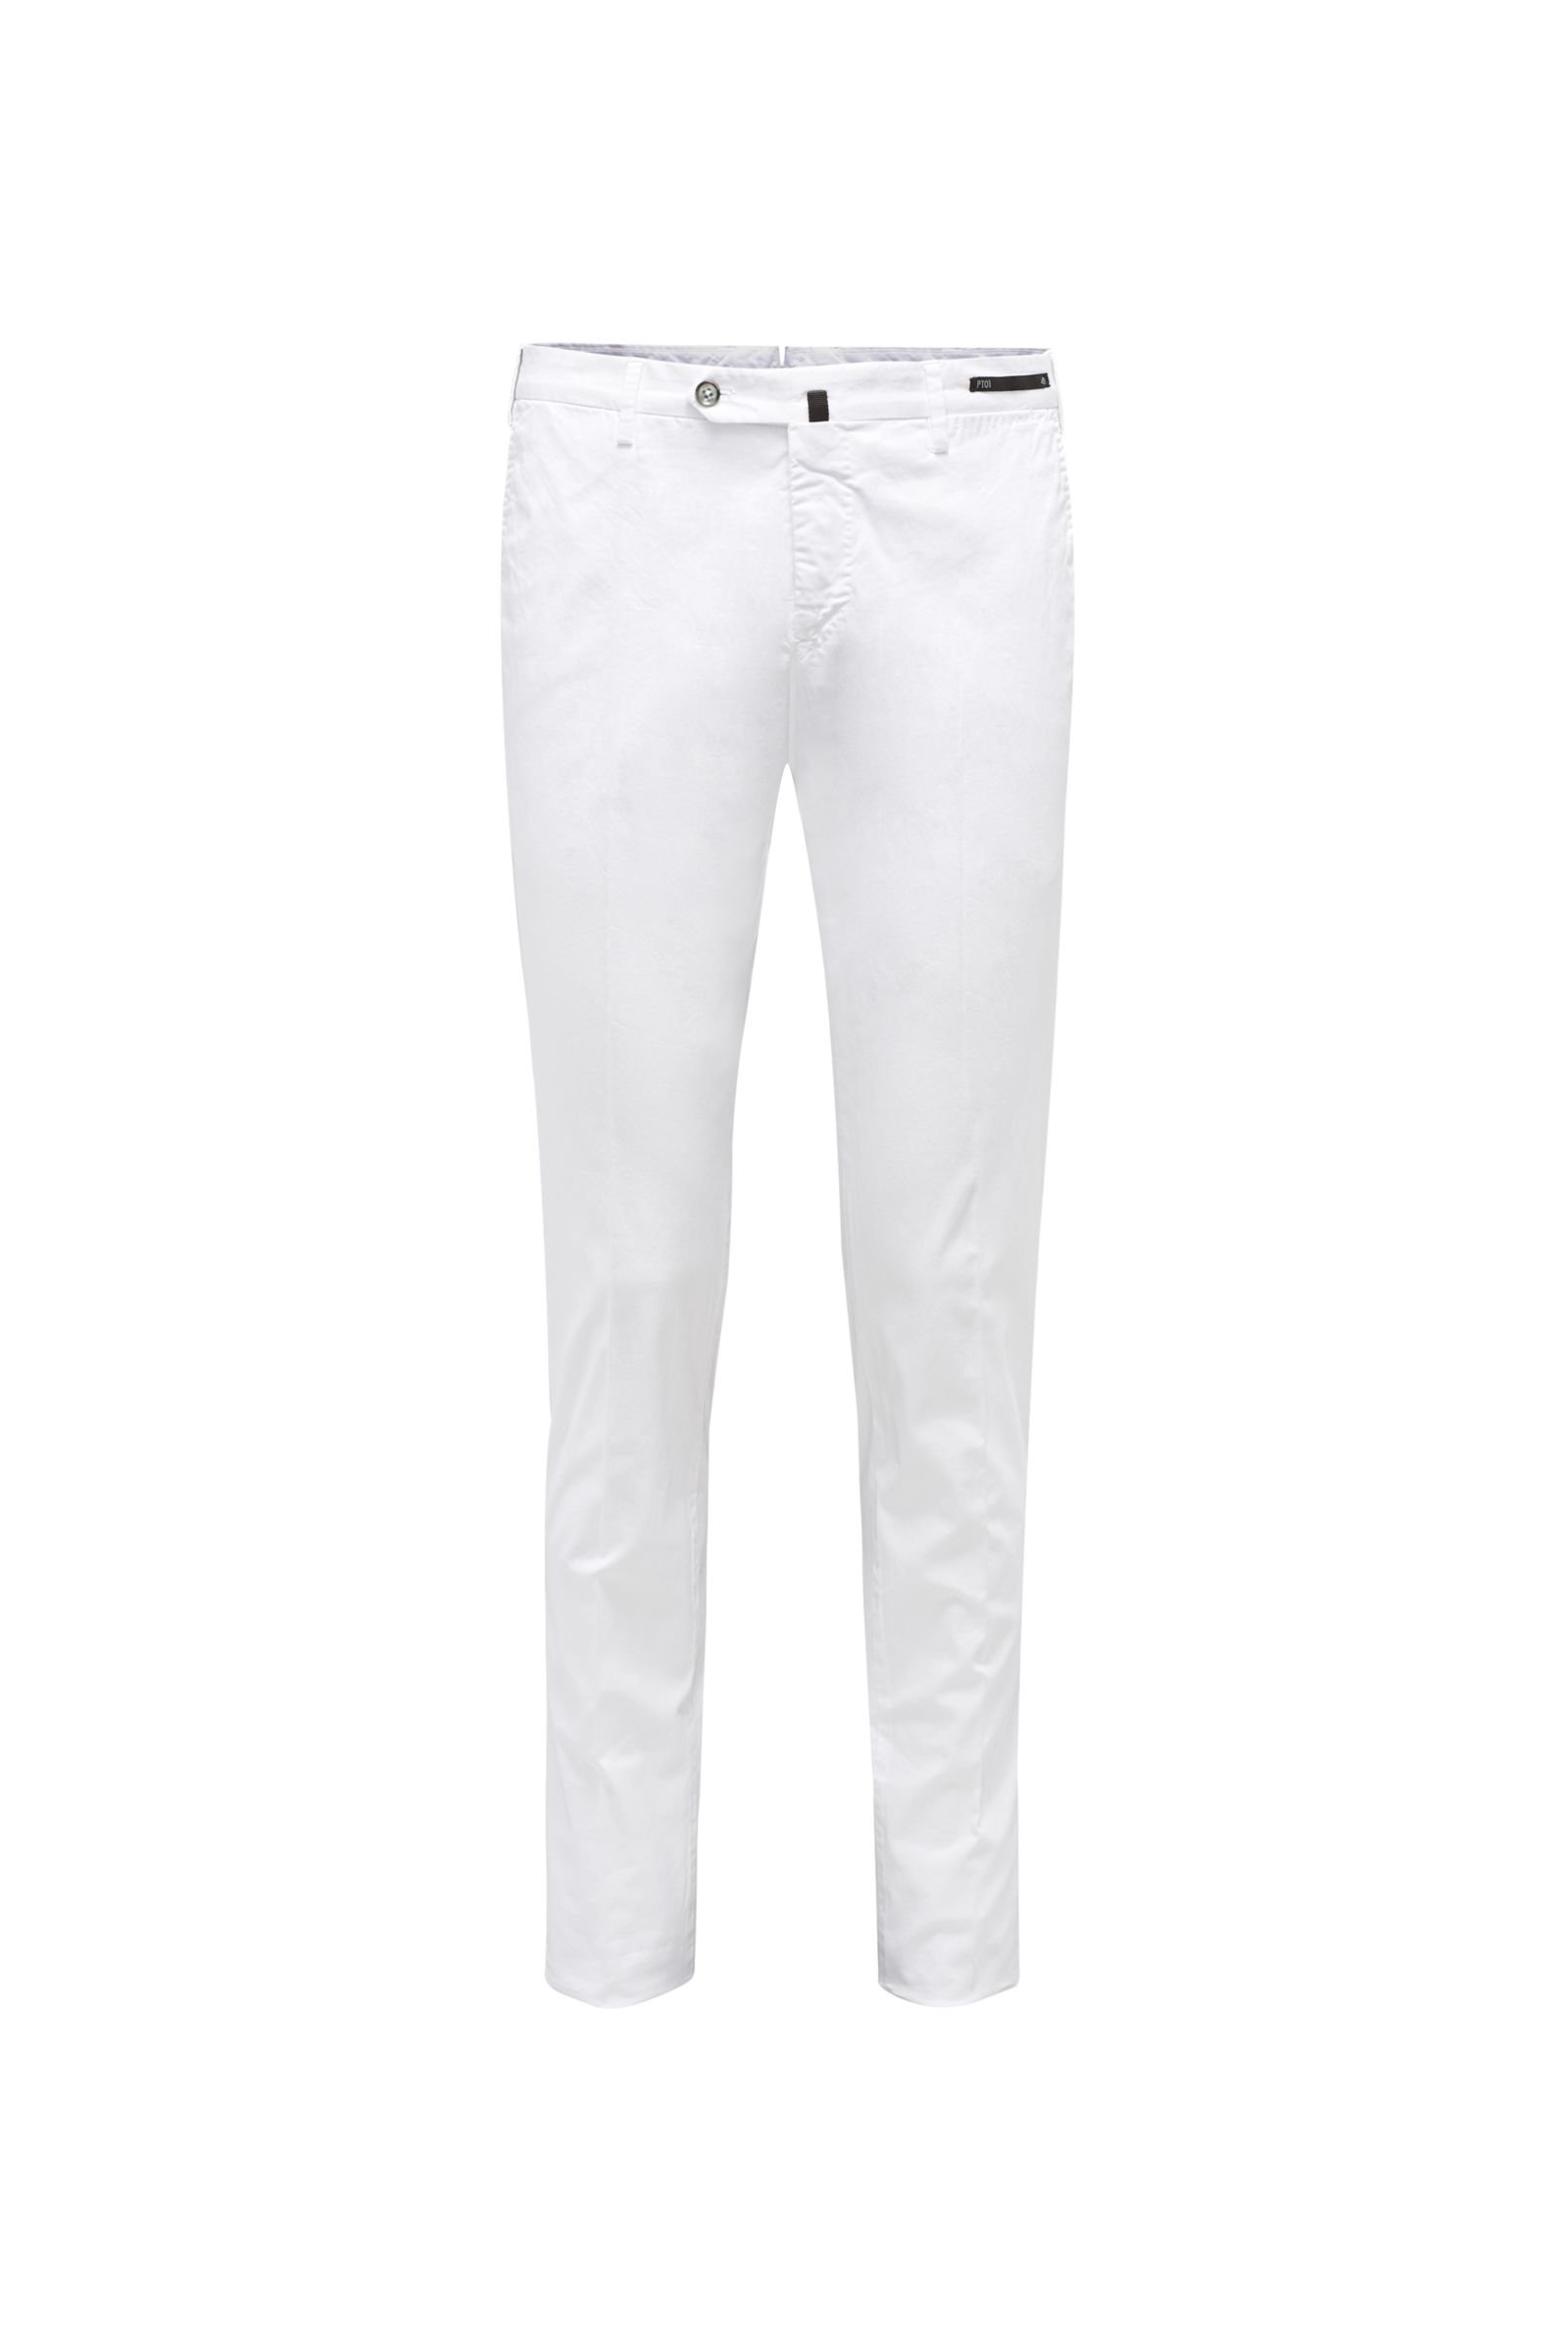 Cotton trousers 'Business Evo Fit' white